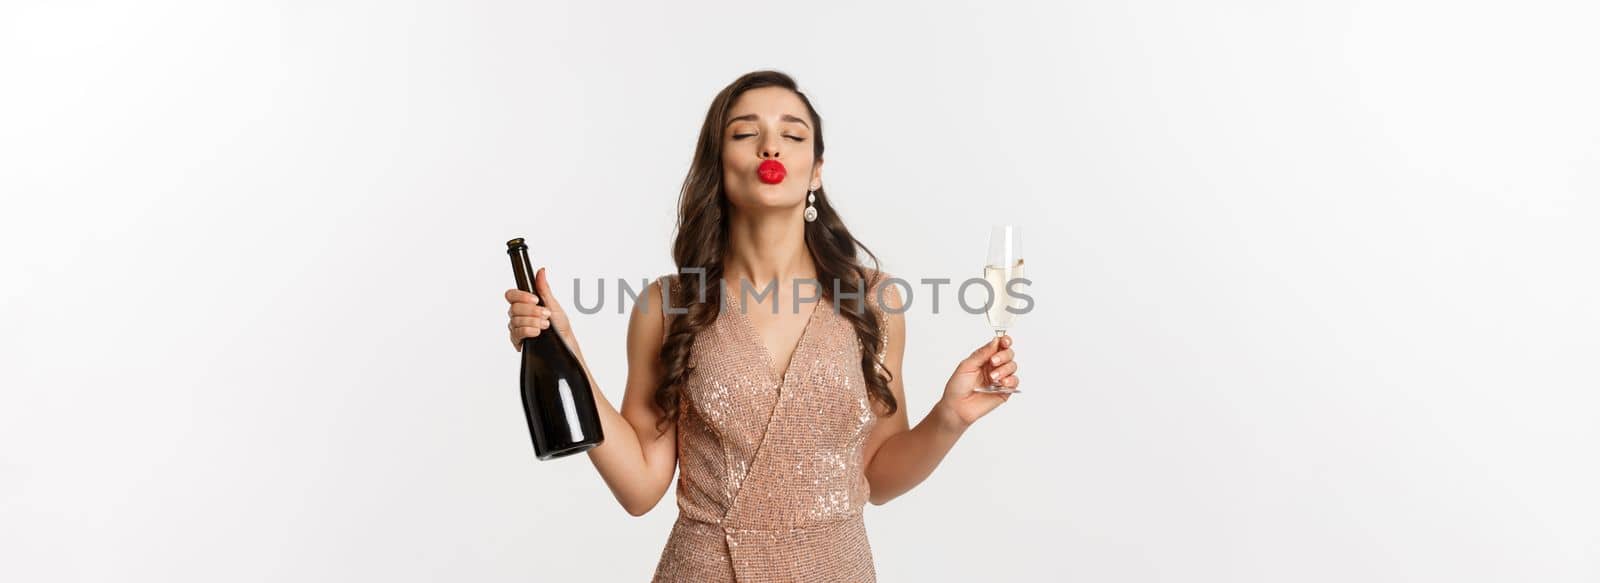 Winter holidays celebration concept. Beautiful and silly woman in elegant dress enjoying New Year party, drinking champagne, pucker lips for kiss, standing over white background.